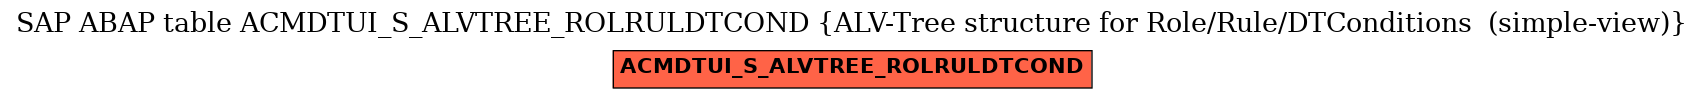 E-R Diagram for table ACMDTUI_S_ALVTREE_ROLRULDTCOND (ALV-Tree structure for Role/Rule/DTConditions  (simple-view))